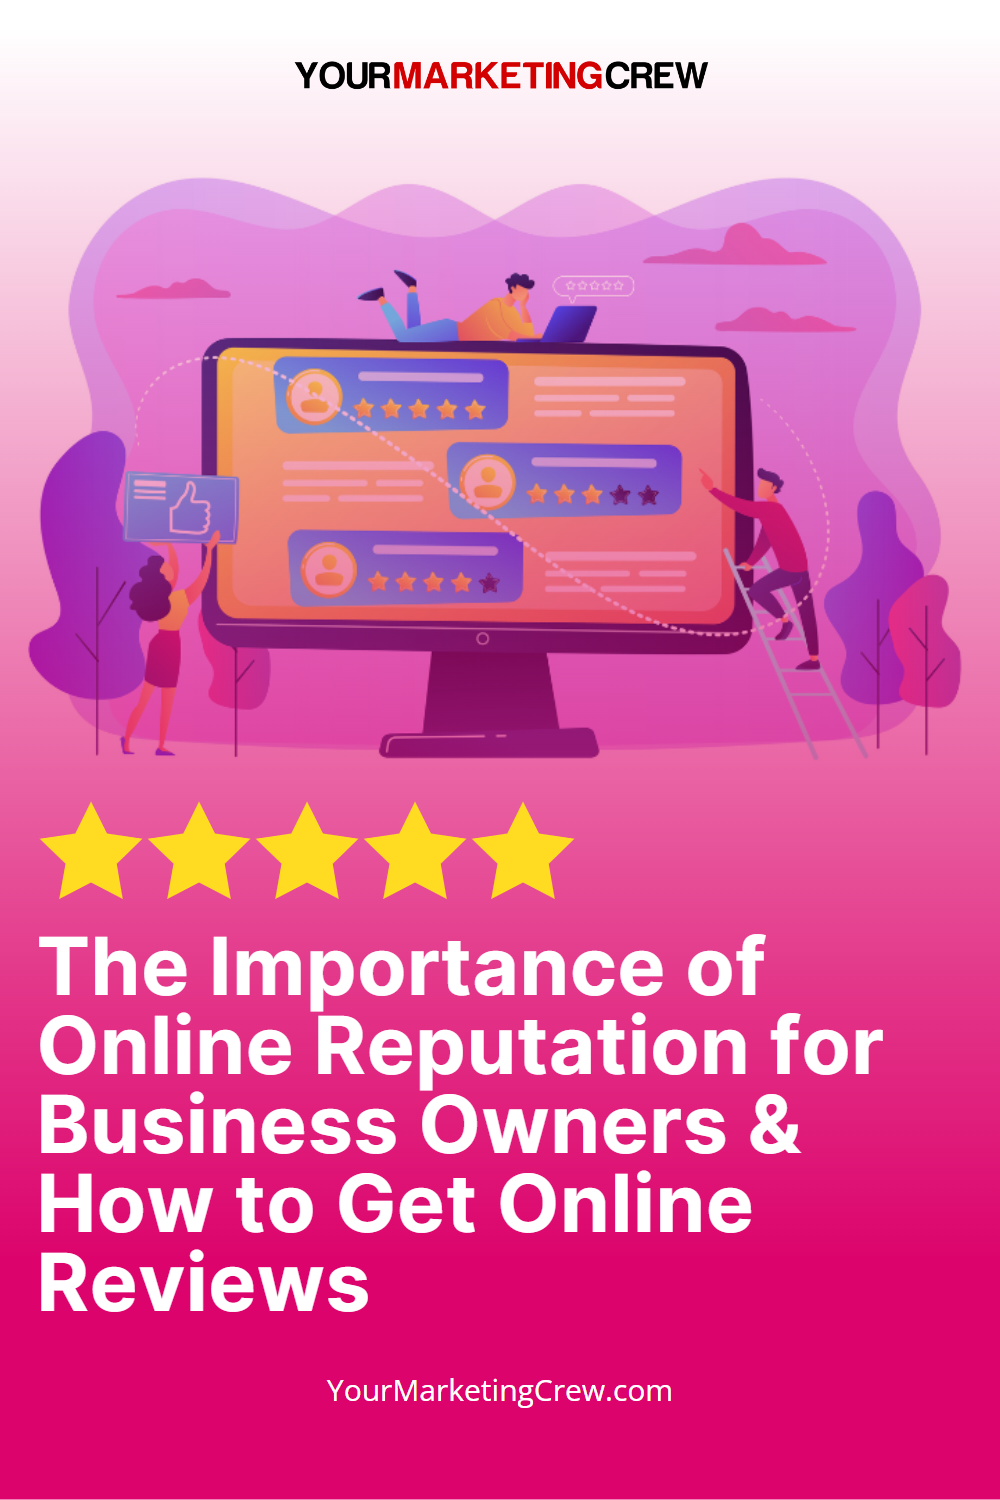 The Importance of Online Reputation & How to Get Online Reviews